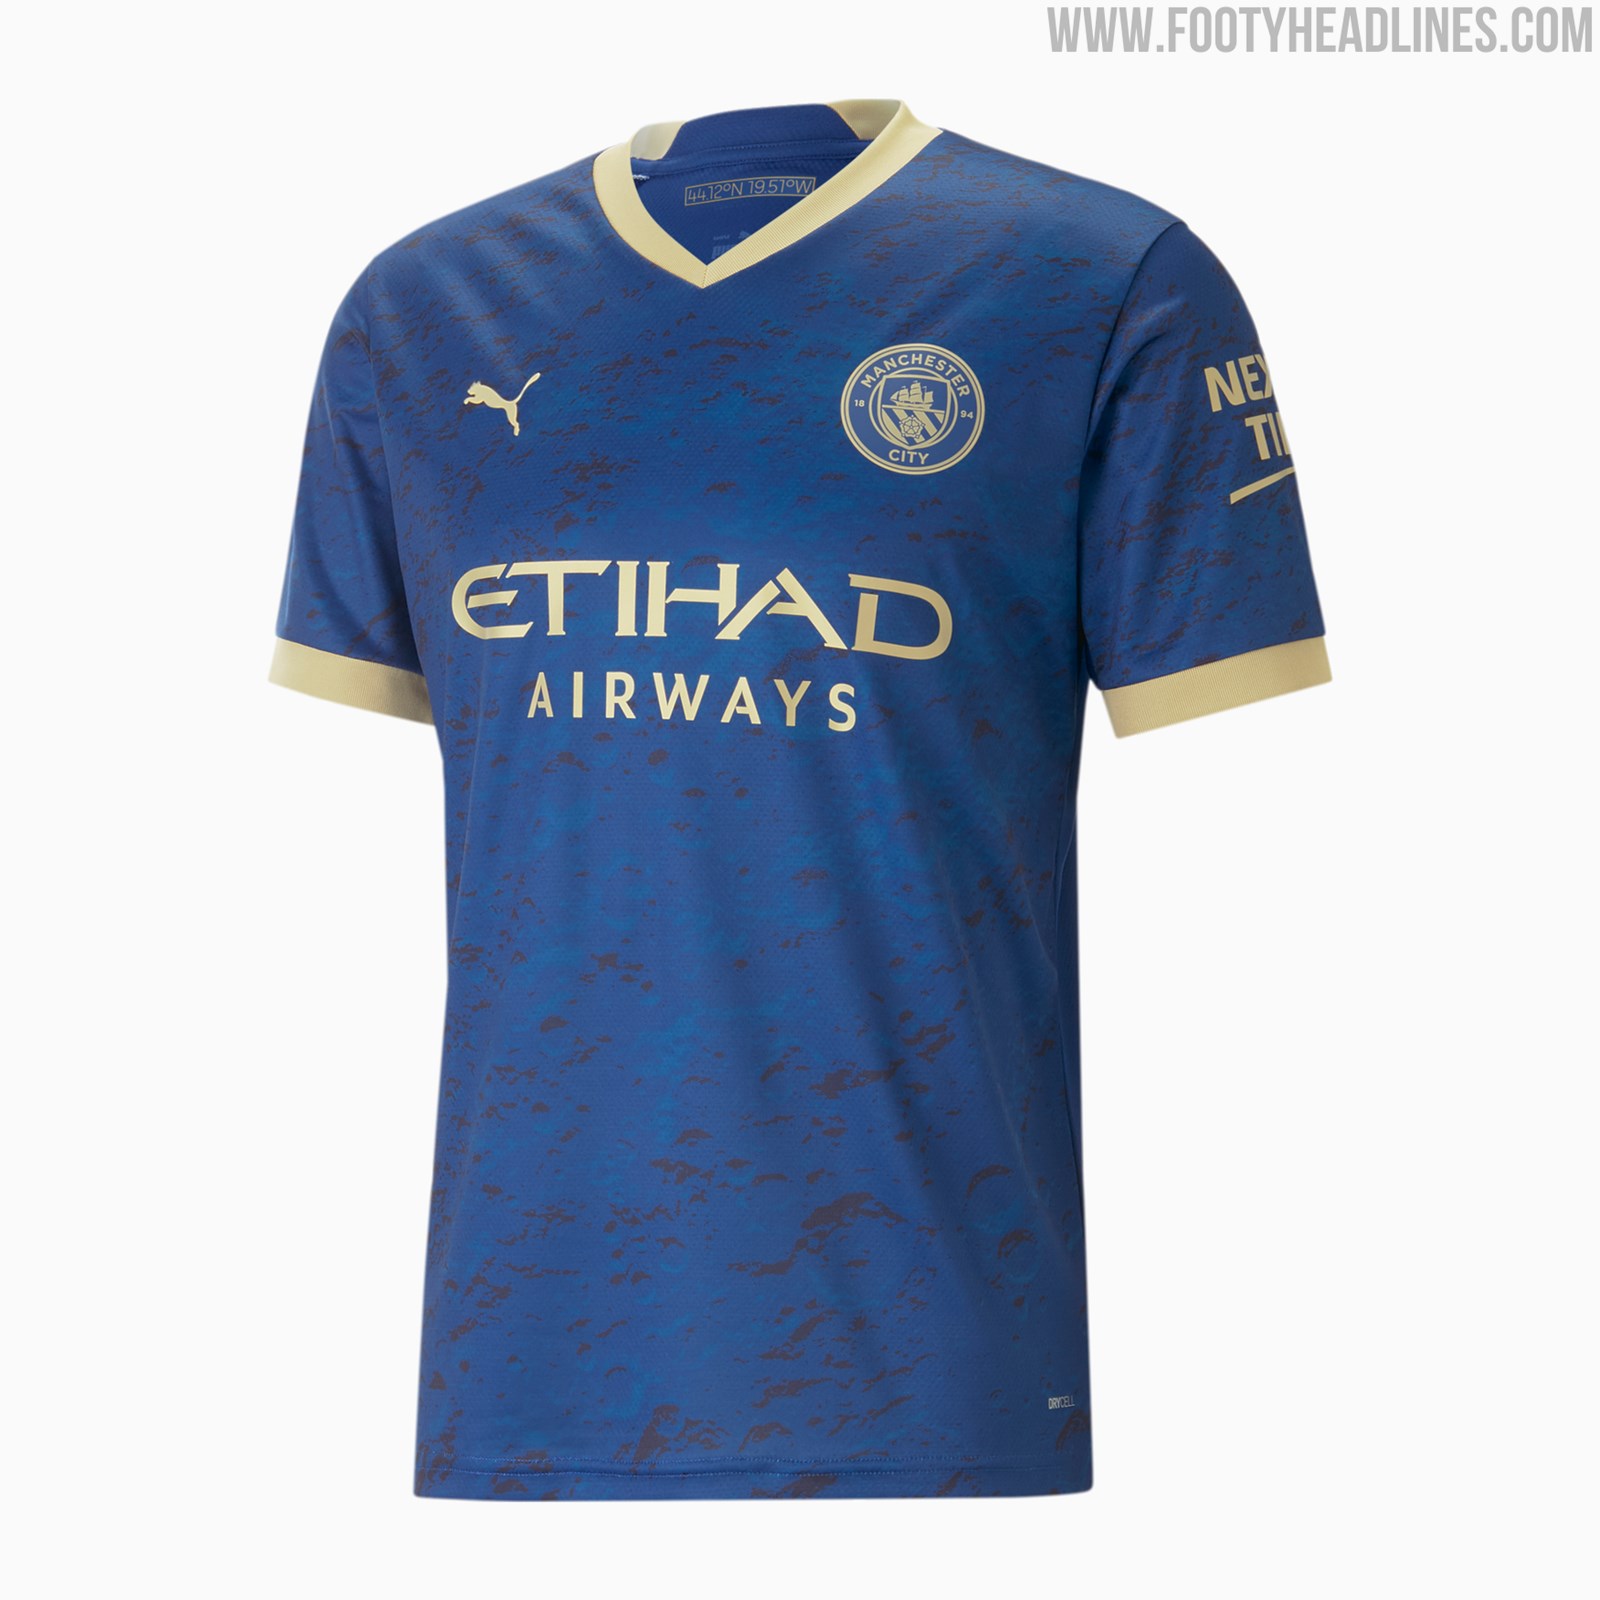 Manchester City 22-23 New Year Shirt Released - Headlines